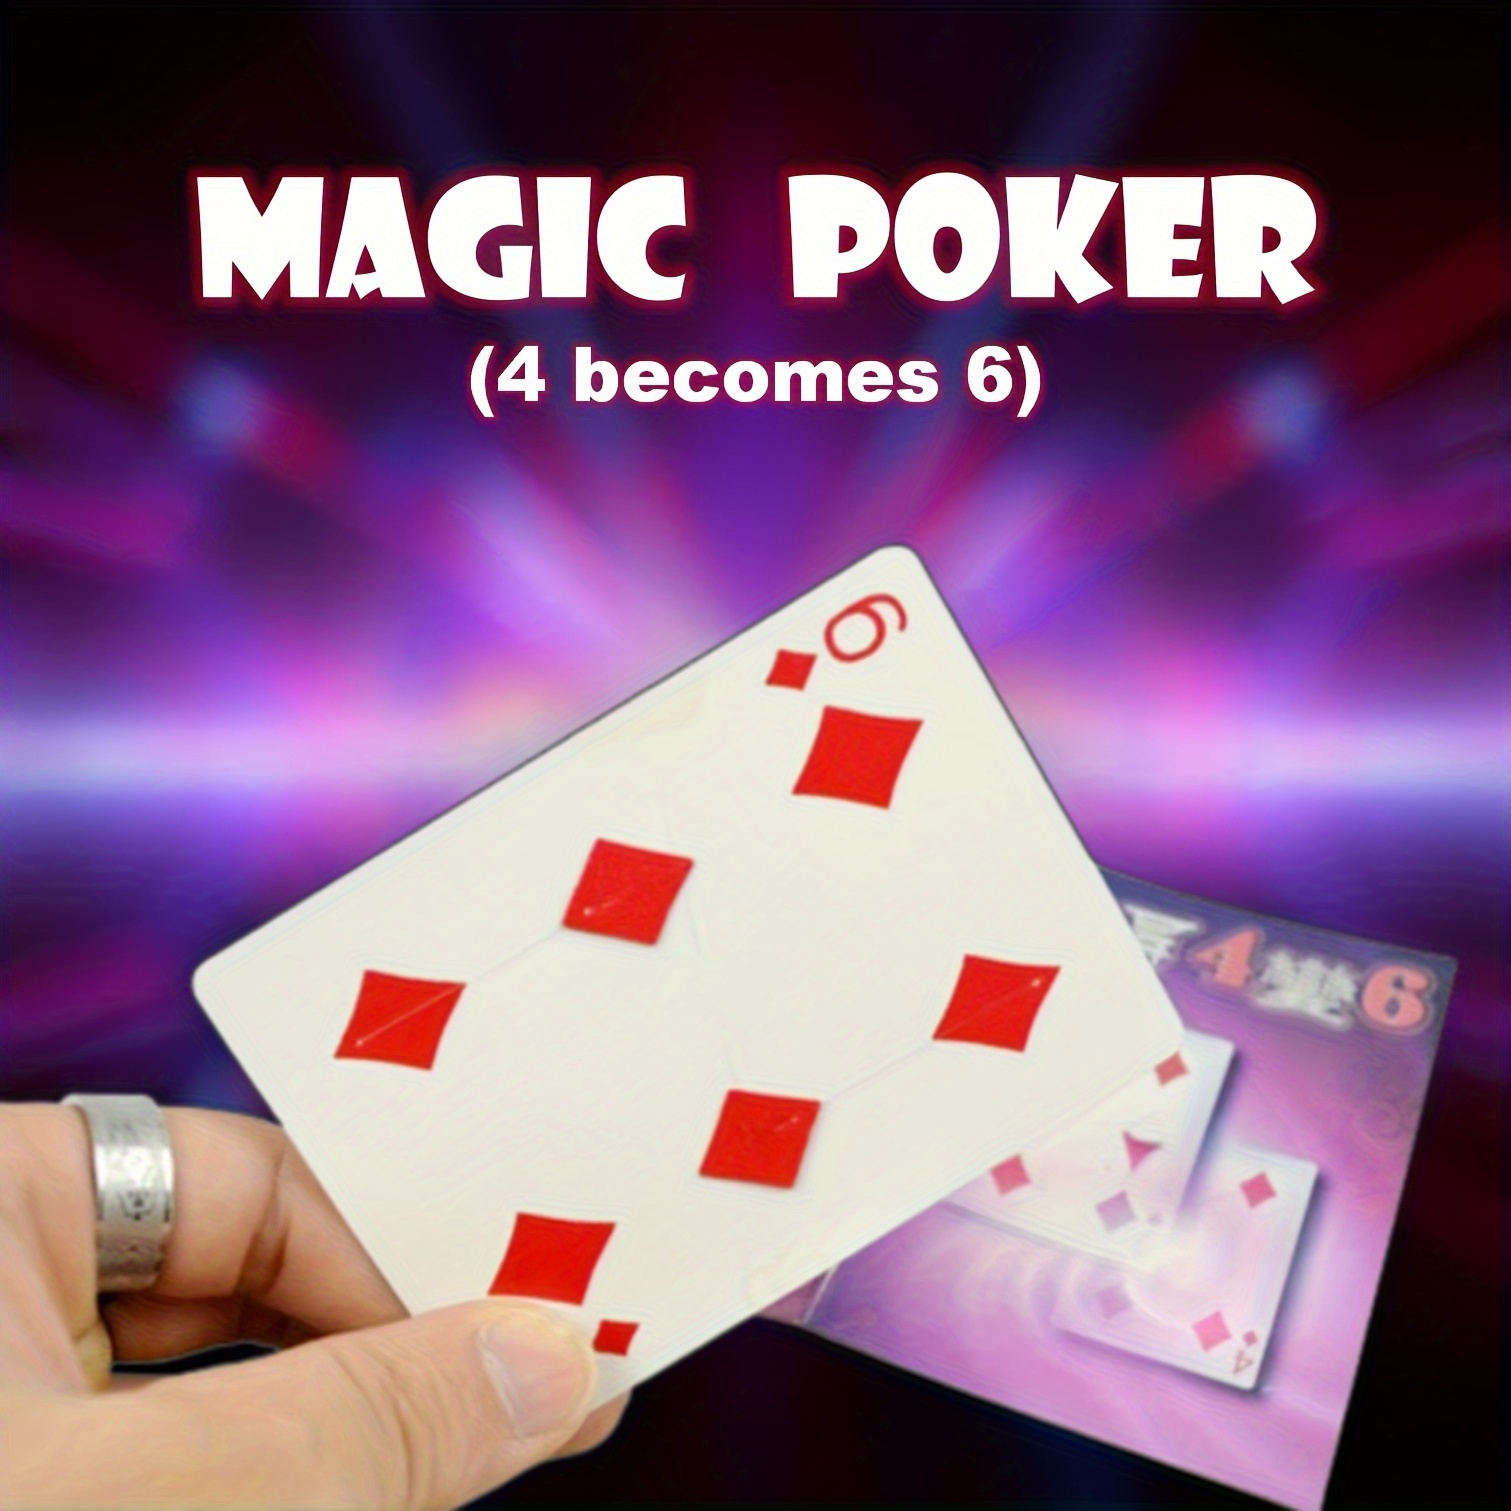 

Magical Playing Cards, With Ever-changing Numbers, In The Blink Of An Eye 4 Becomes 6, Cool Magic Prop, An Assistant To Enhance The Atmosphere